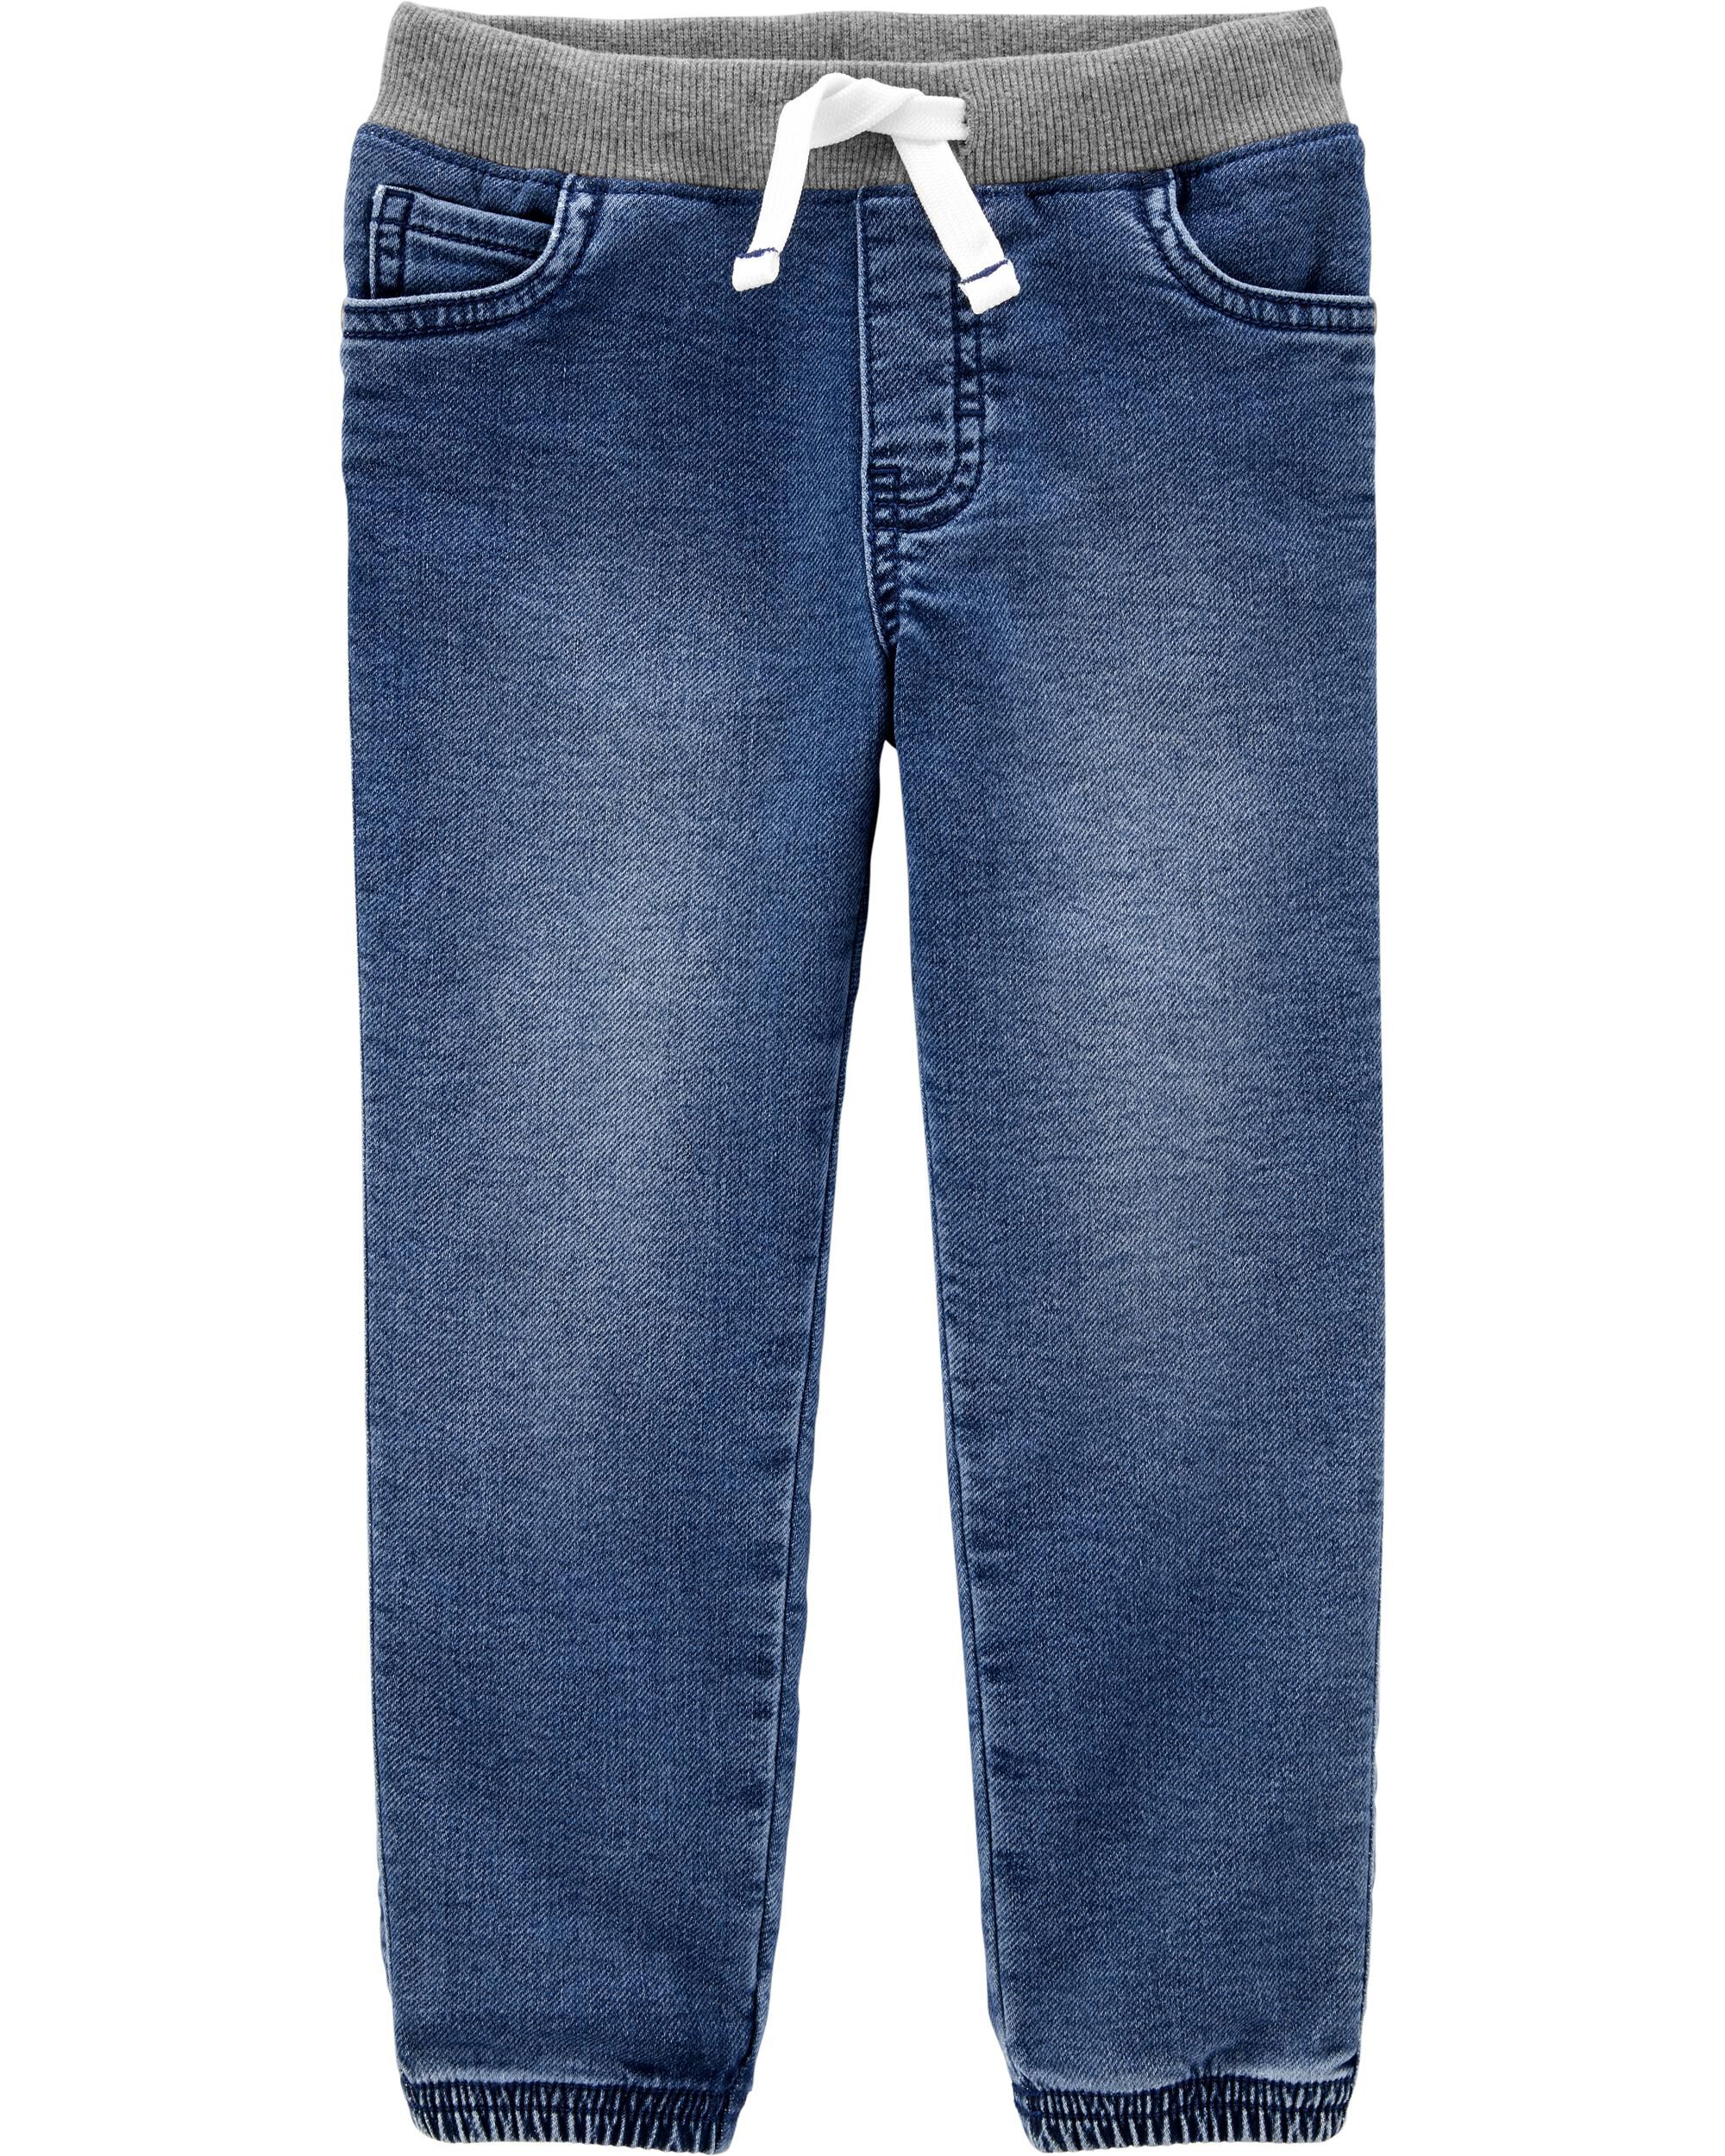 carter's pull on jeans